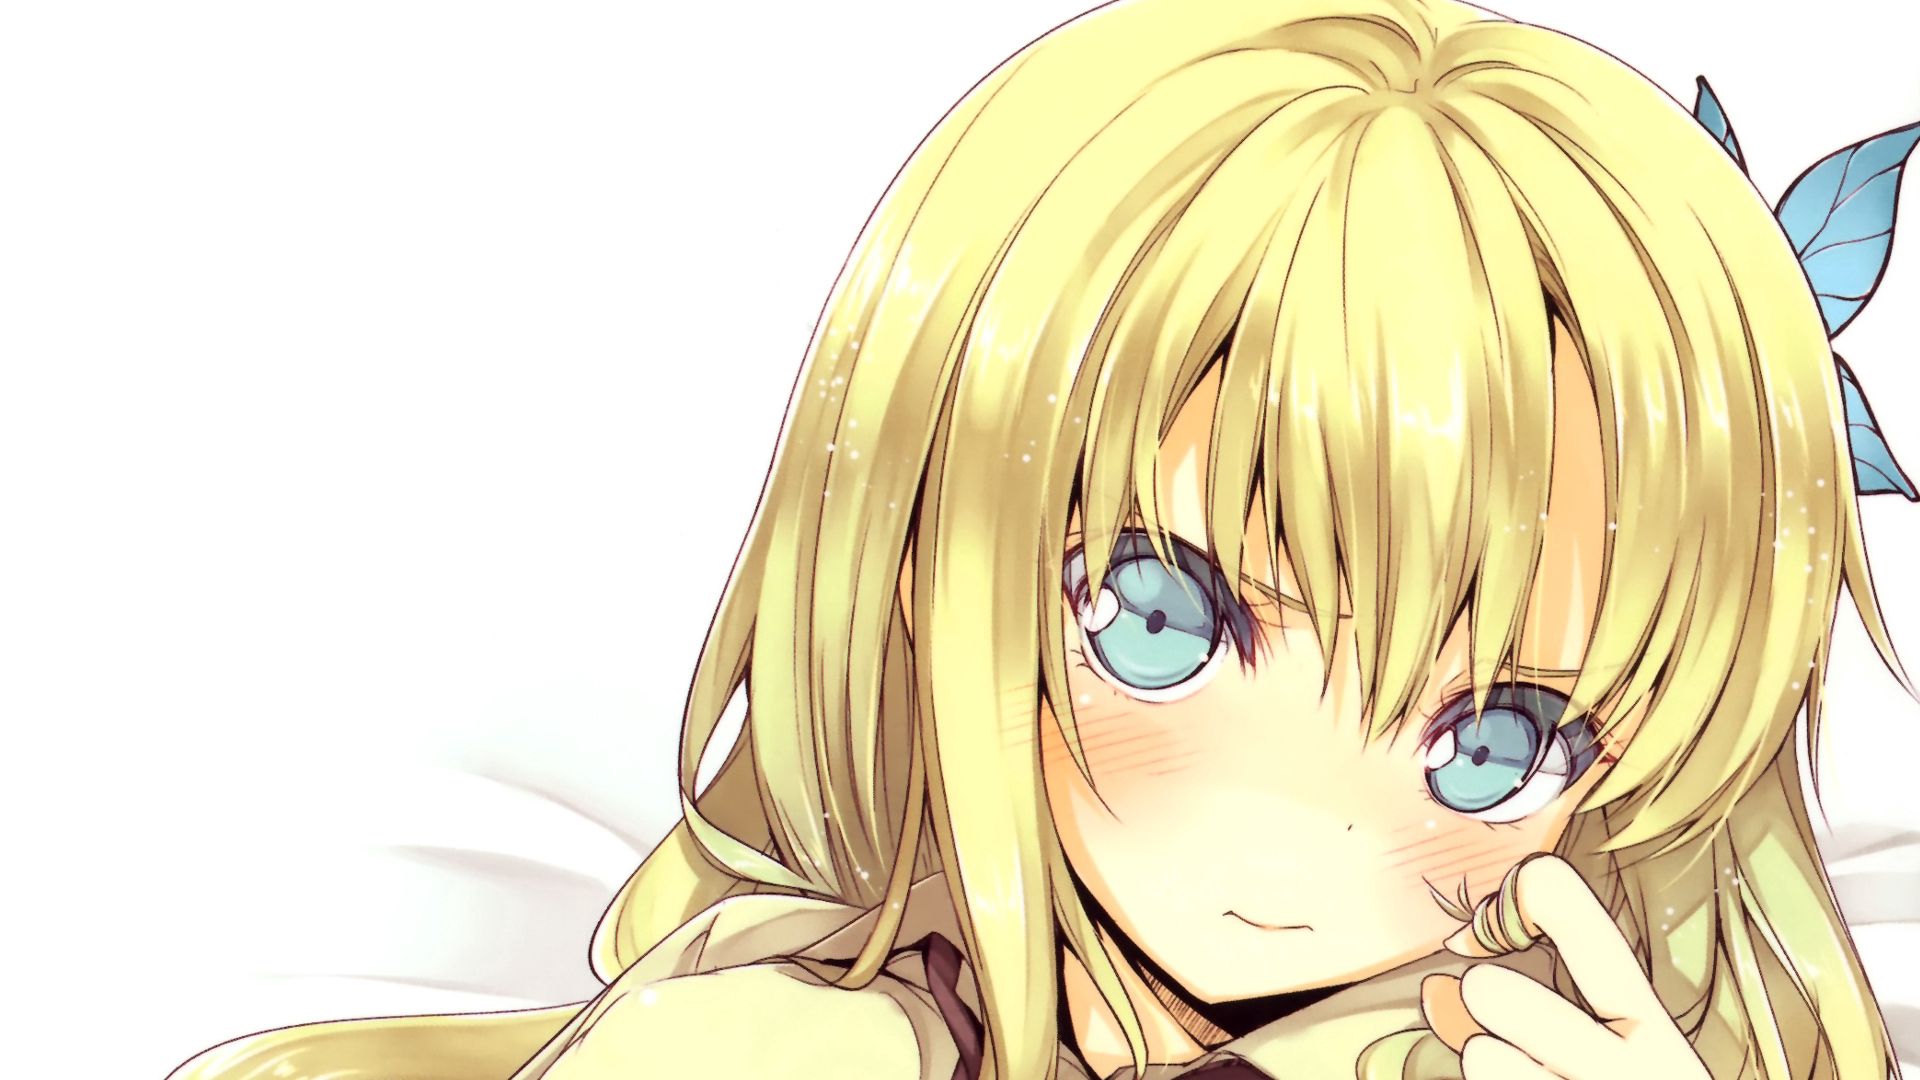 blonde, pretty, anime, sight, opinion, girl wallpaper for mobile